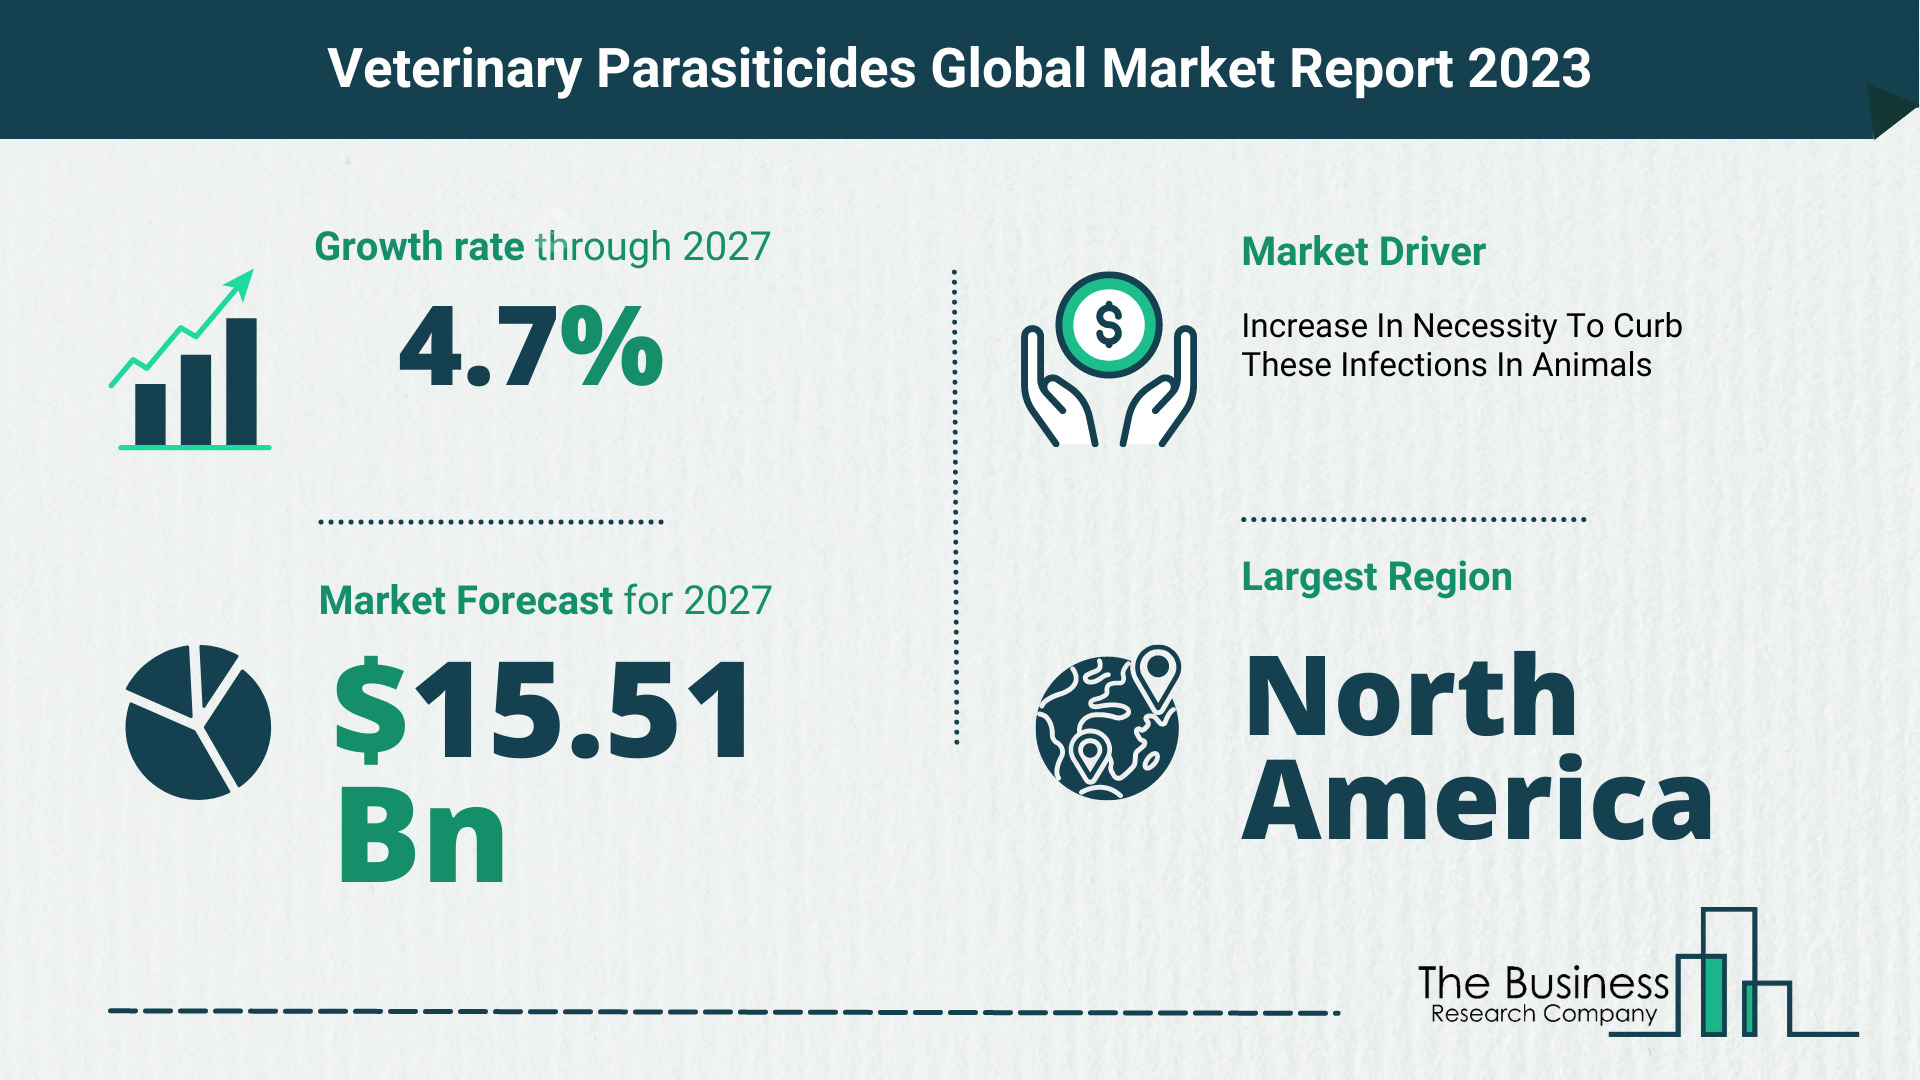 How Will The Veterinary Parasiticides Market Globally Expand In 2023?